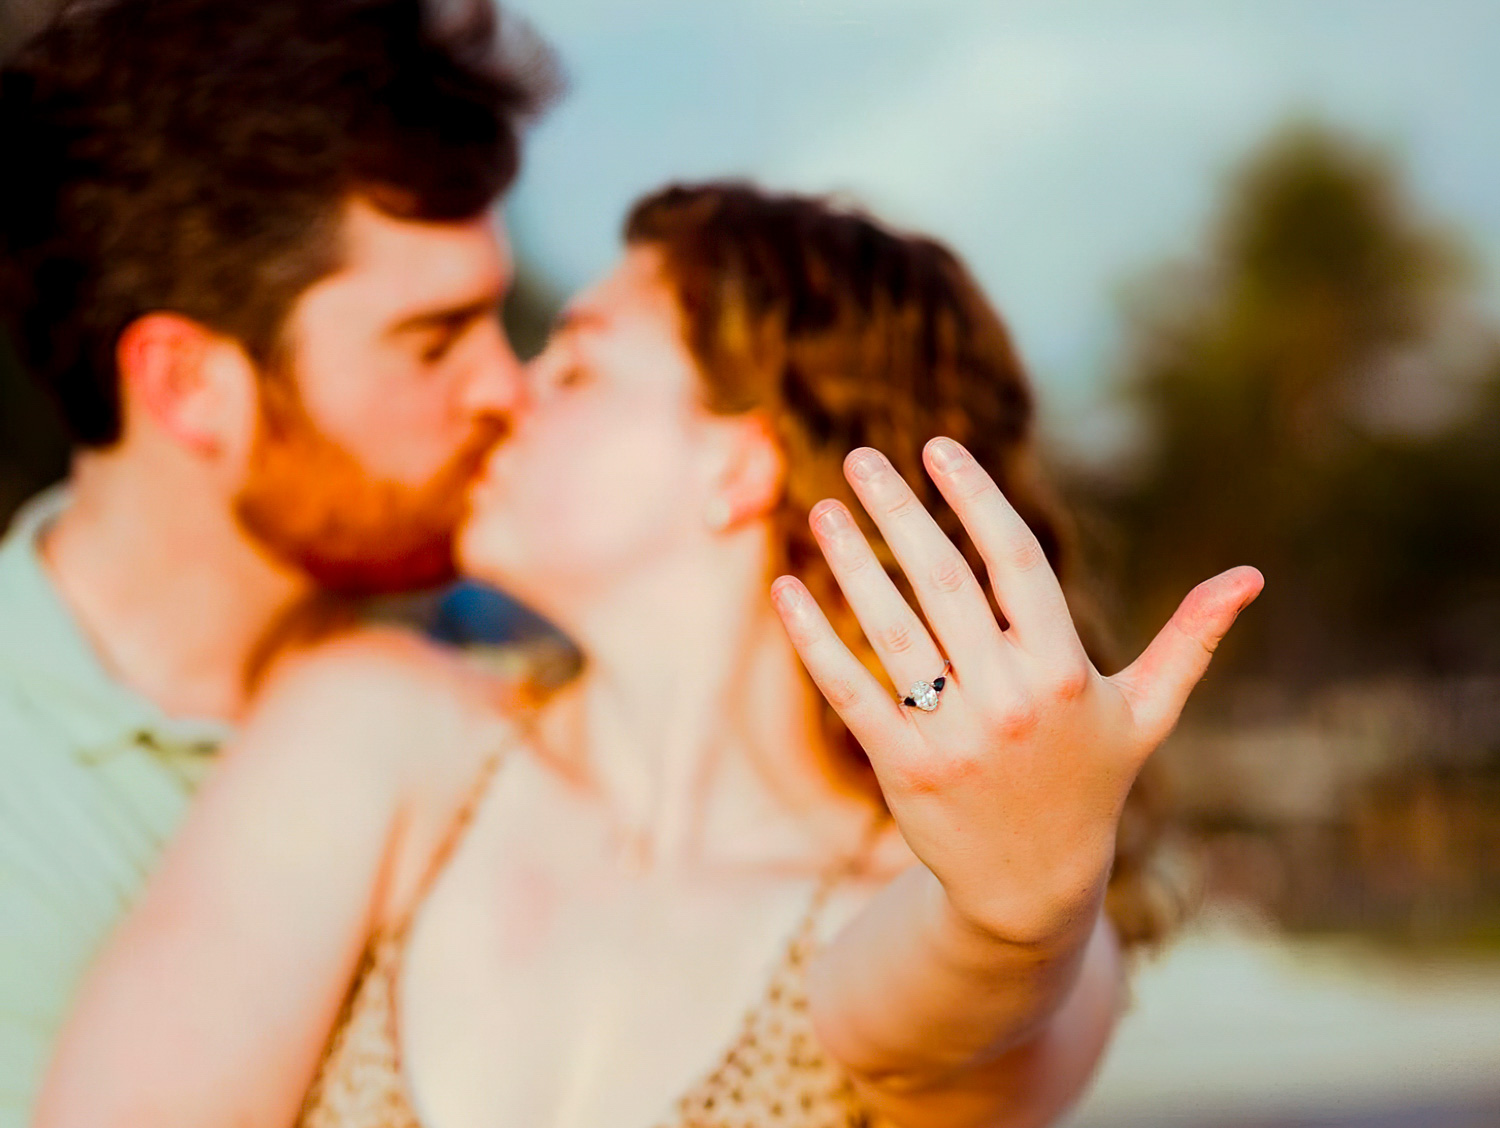 The last step of the custom engagement ring creation is your proposal